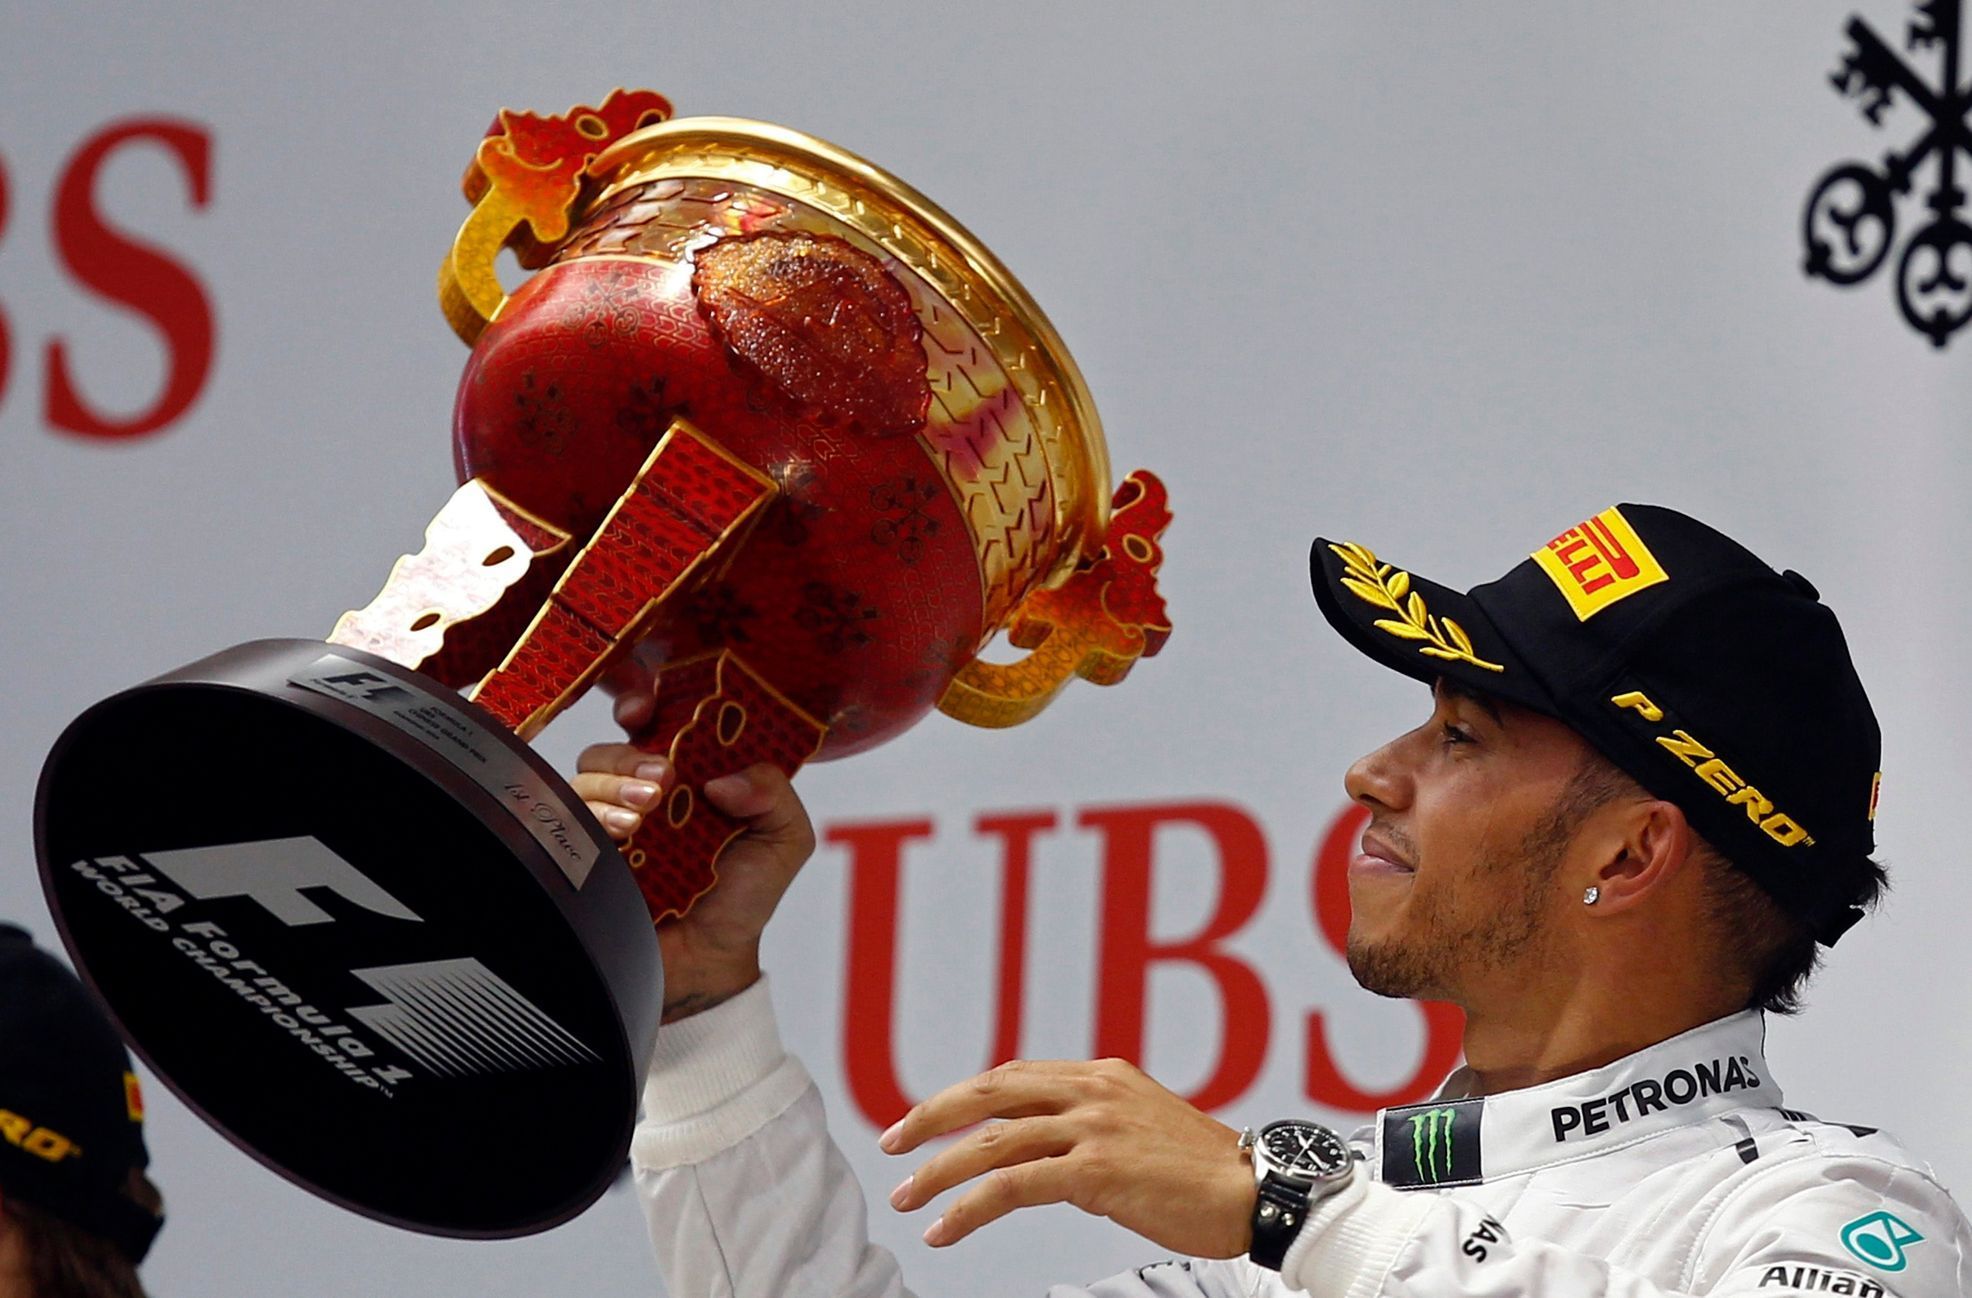 Mercedes Formula One driver Lewis Hamilton of Britain waves his trophy on the winners' podium, after winning the Chinese F1 Grand Prix at the Shanghai International circuit